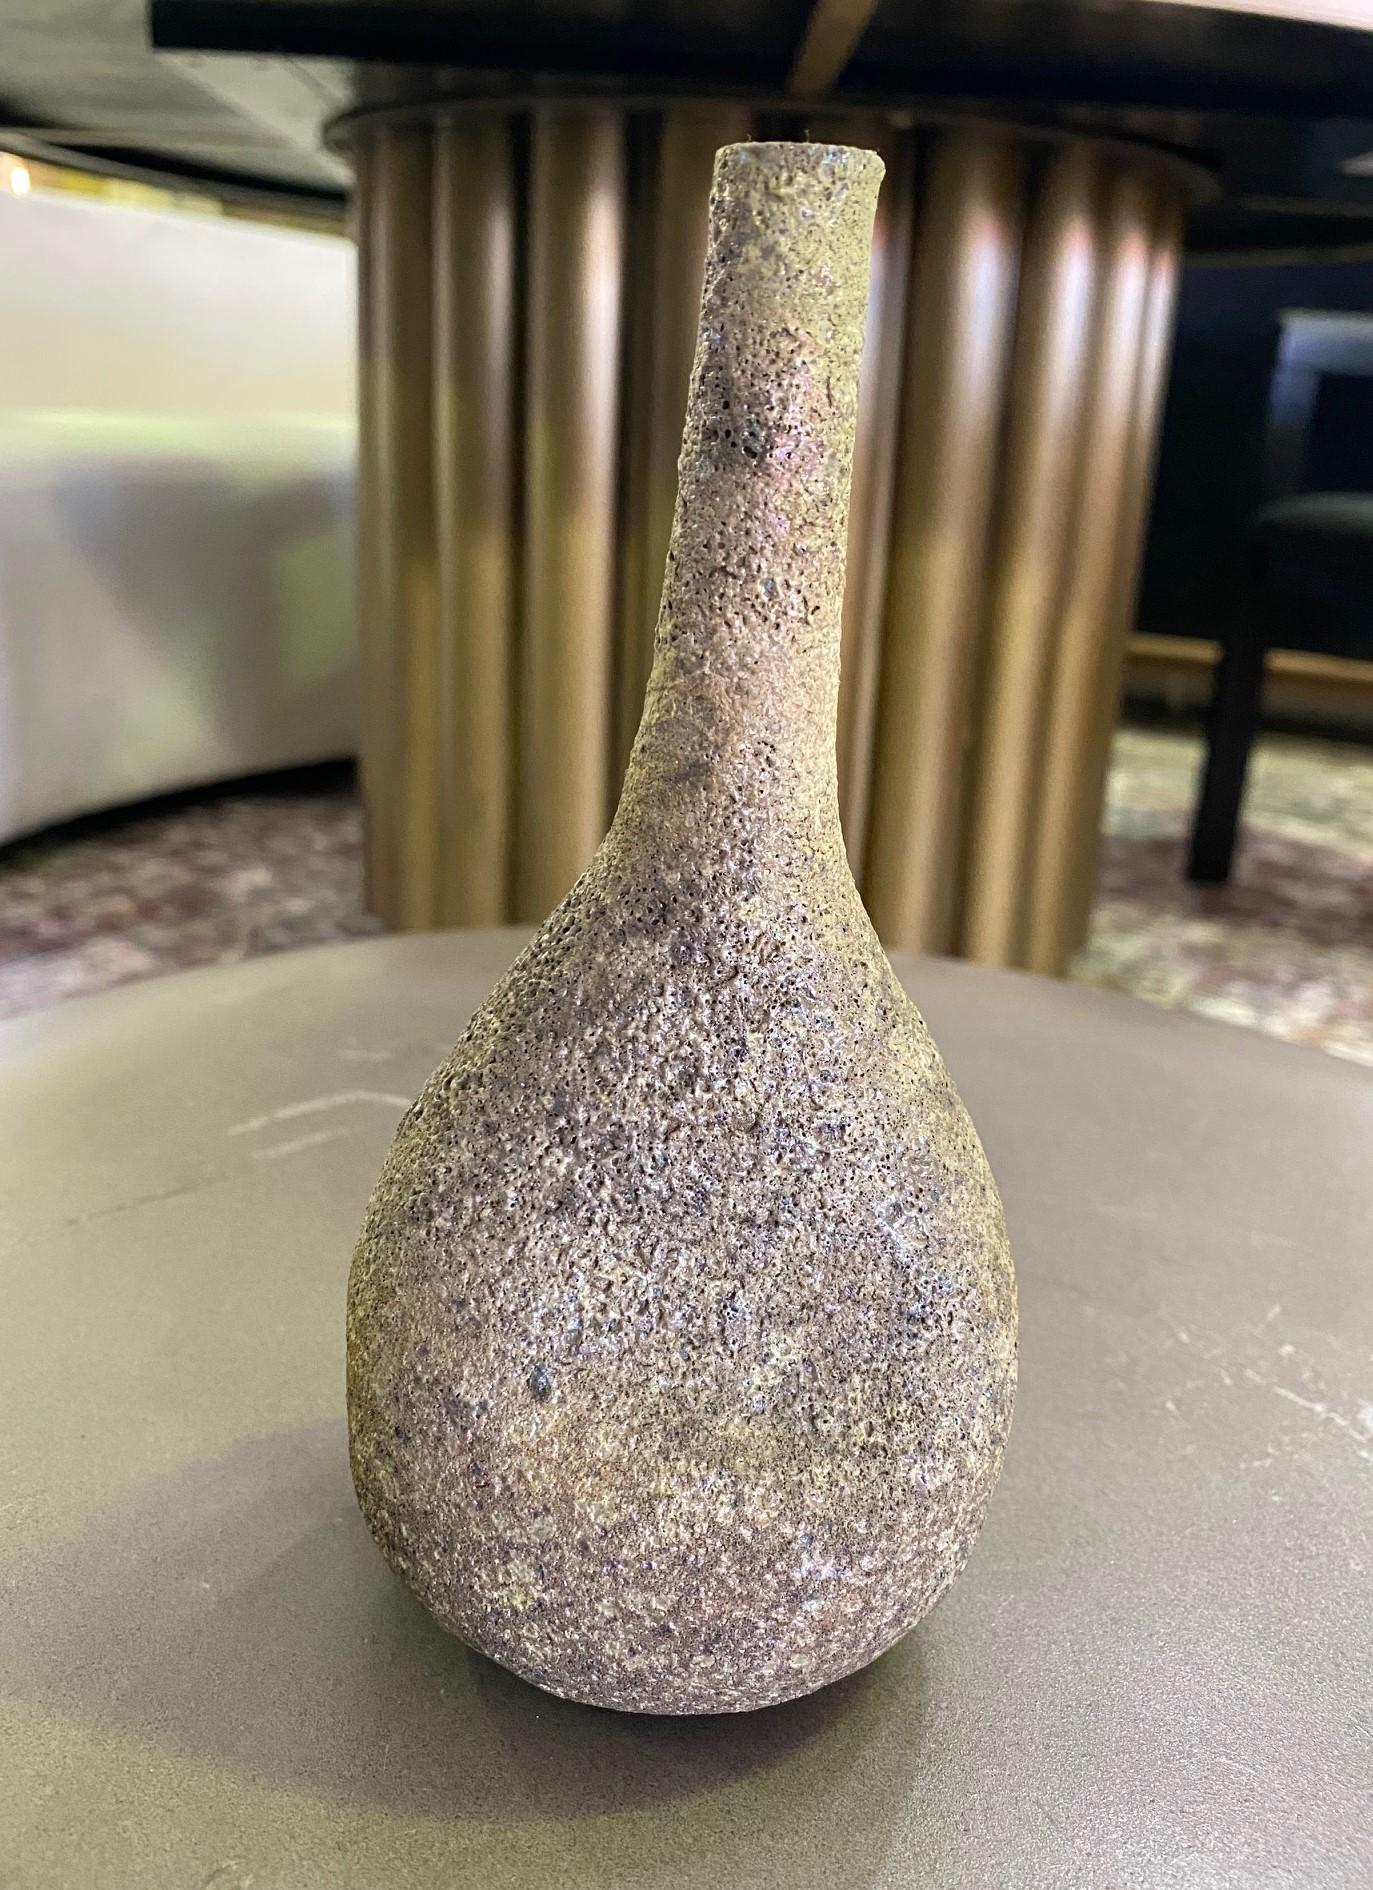 A wonderful gem of a piece by famed American ceramist Beatrice Wood featuring a gorgeous iridescent metallic muted gold and silver lava glaze - one that we have not seen before. A wonderful design with a delicate long neck rising from a circular